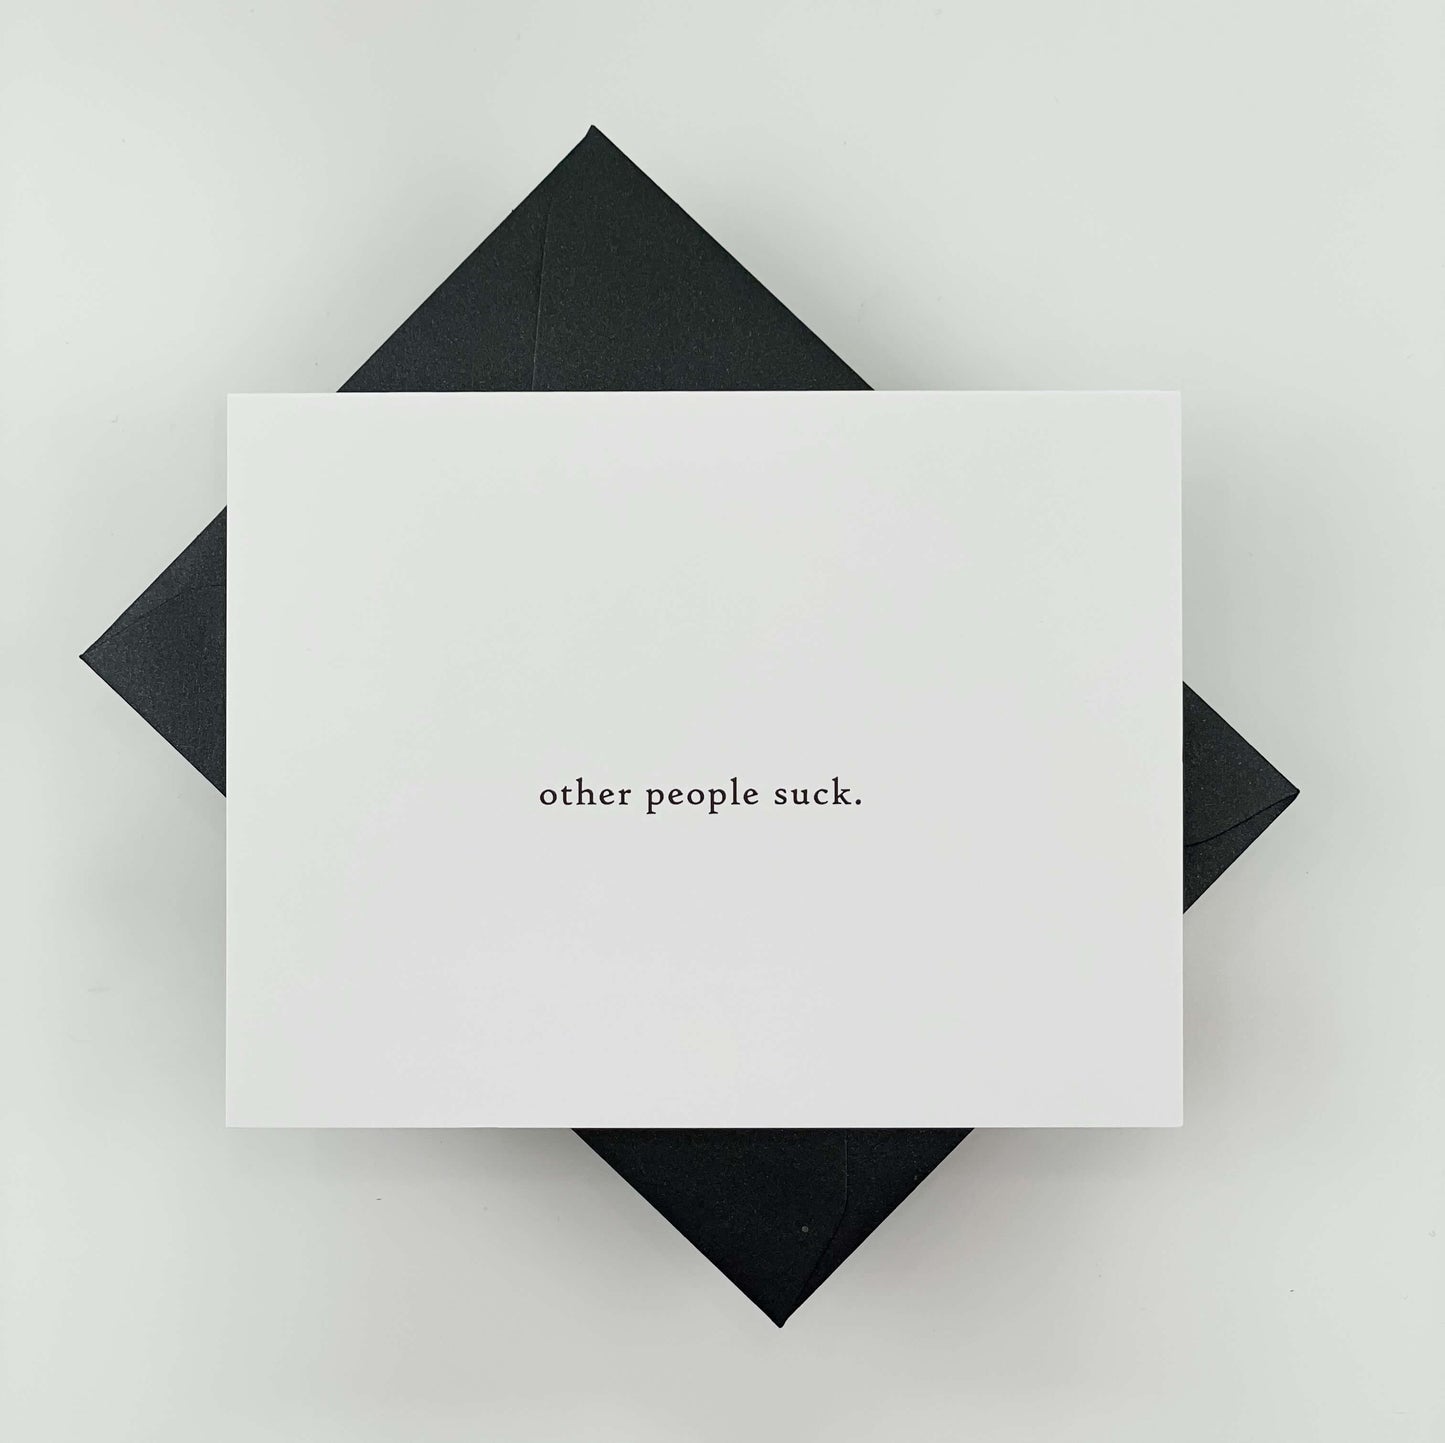 Other People Suck Card